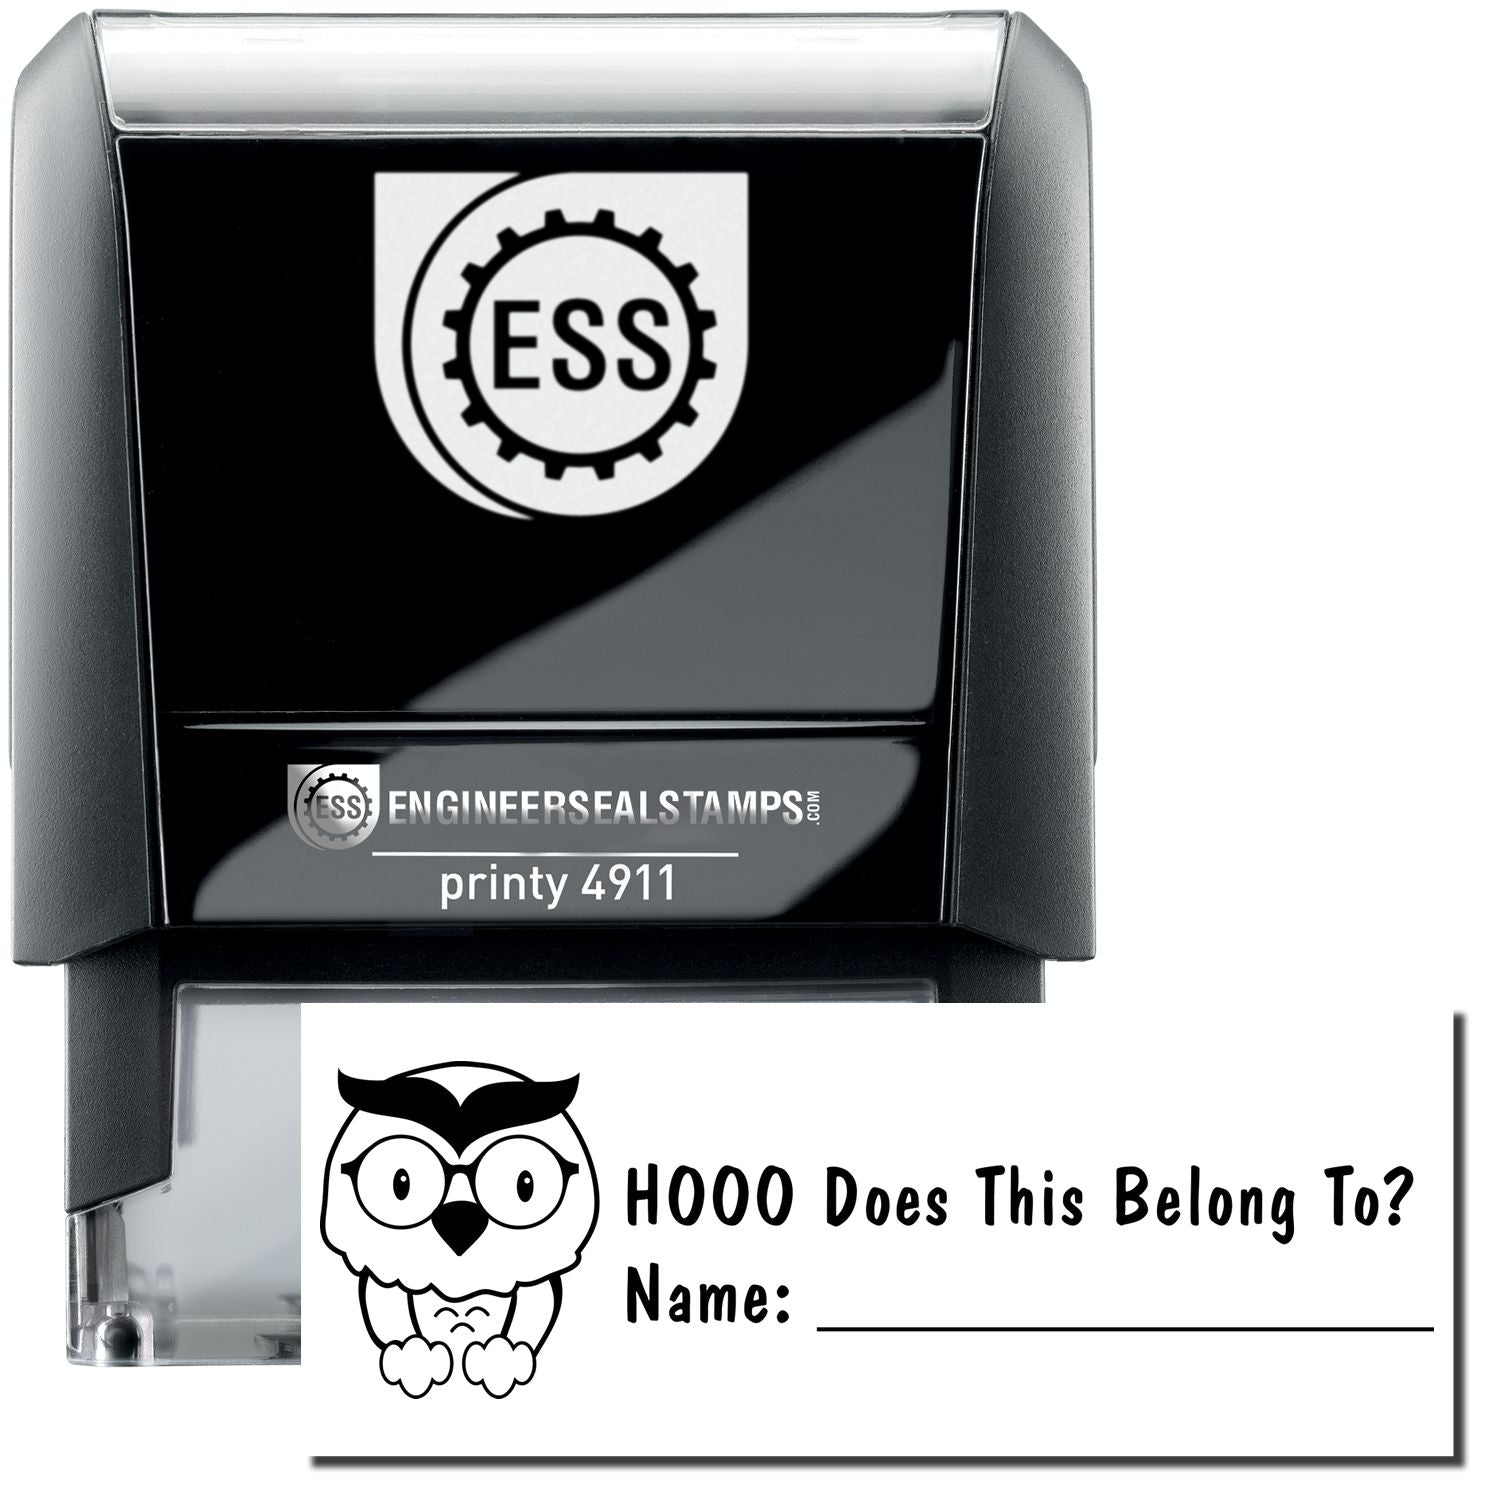 A self-inking stamp with a stamped image showing how the text "HOOO Does This Belong To?" and a second line that reads "Name:" with a line (Also, an image of an owl on the left) is displayed after stamping.